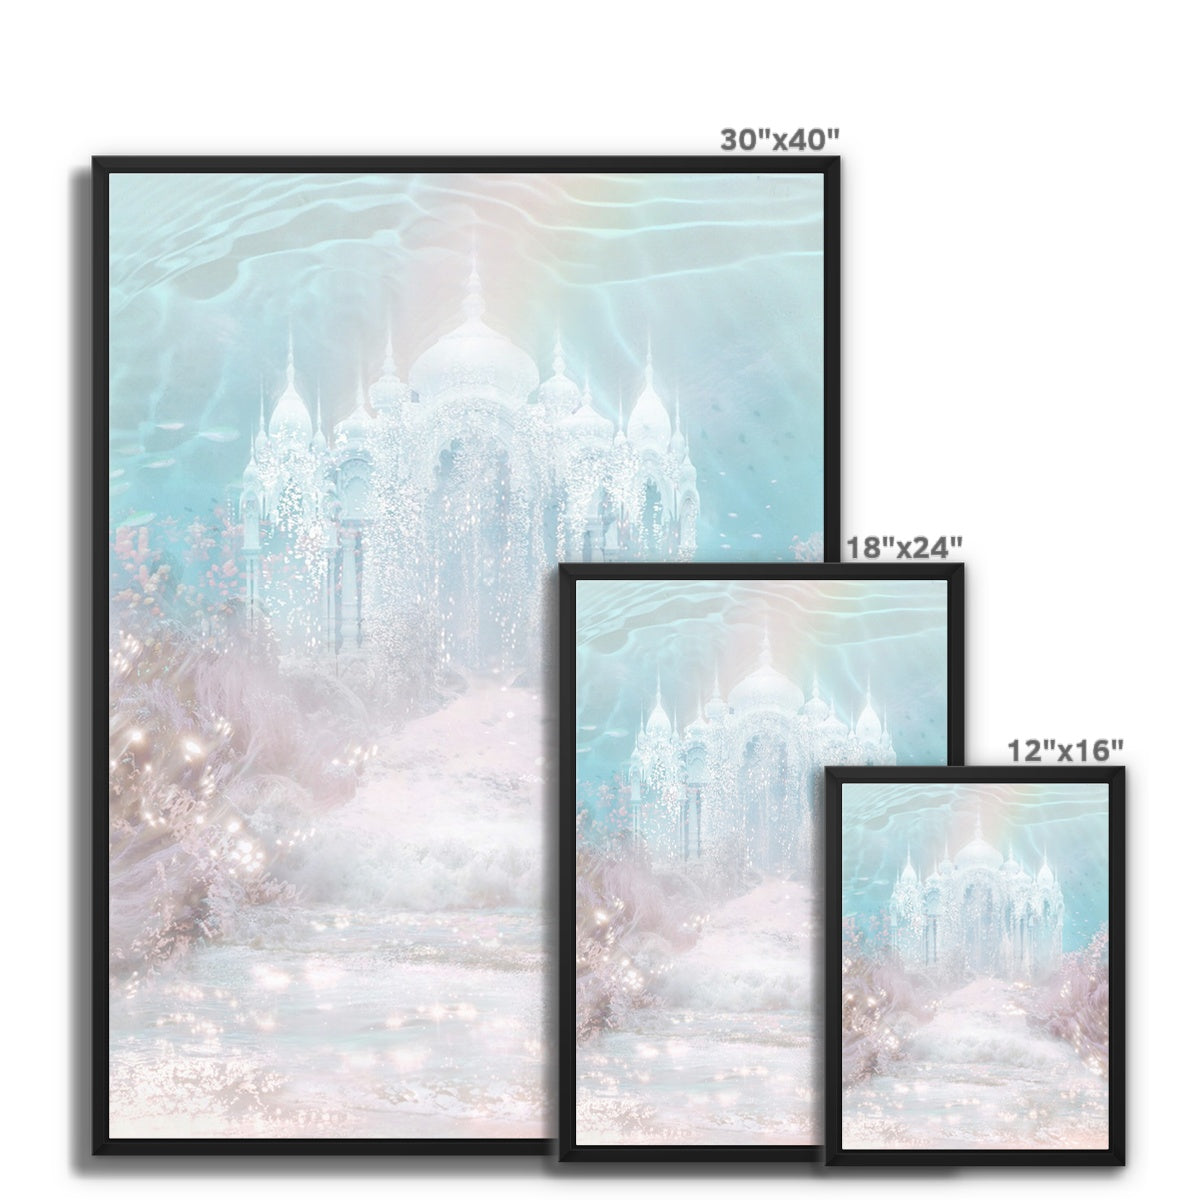 Temple of the Sea Framed Canvas - Starseed Designs Inc.